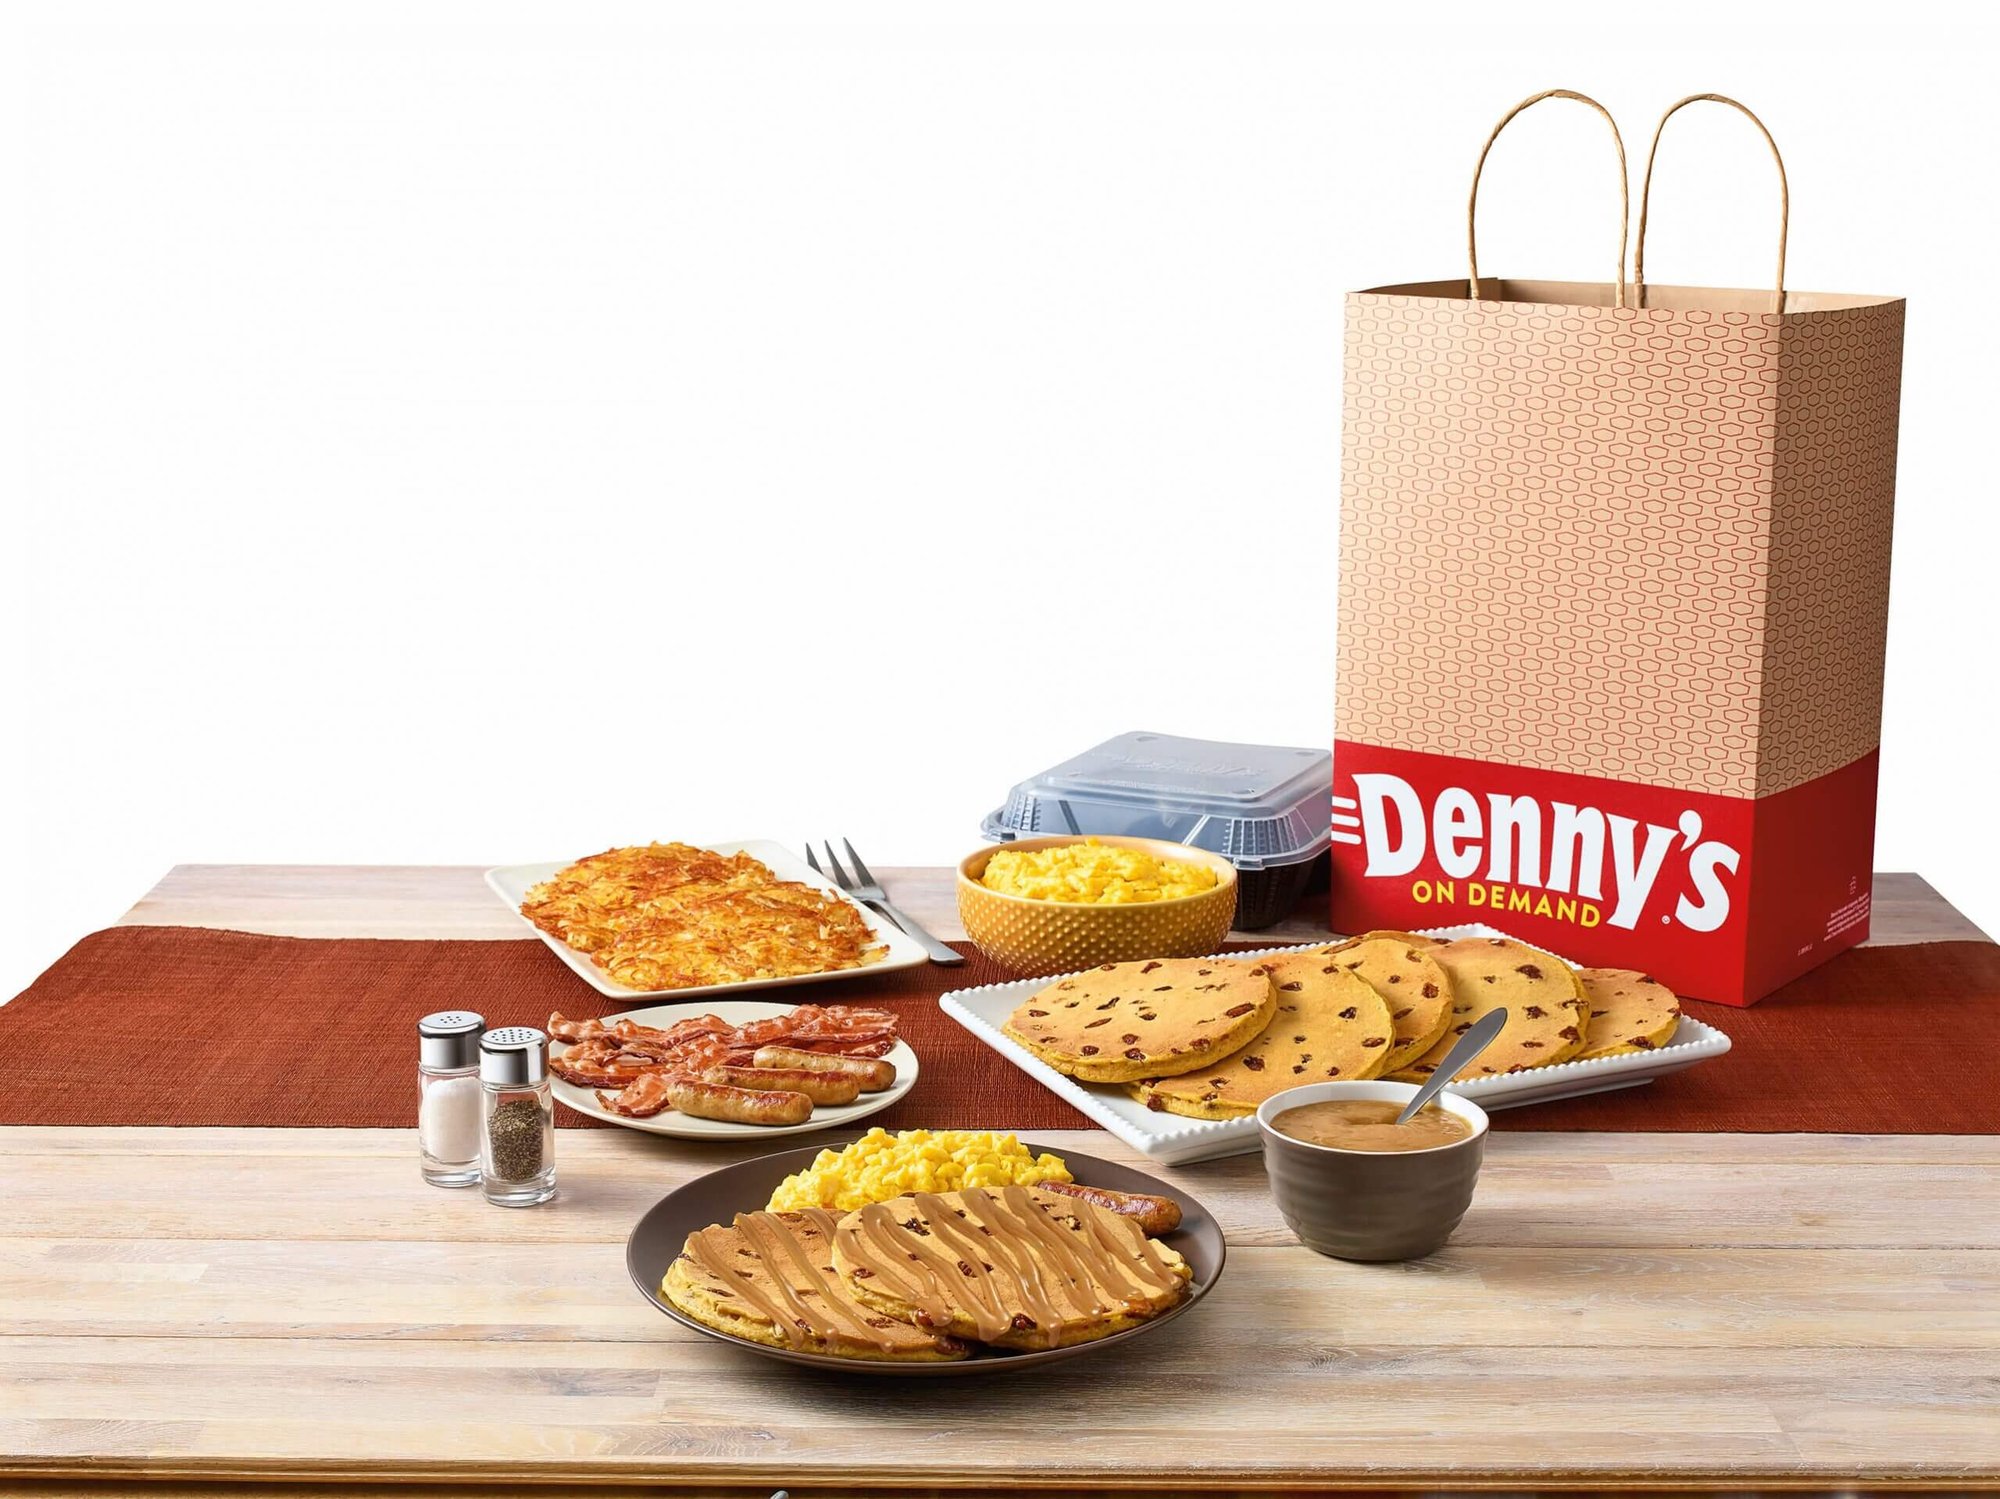 Dennys-on-Demand-scaled-1